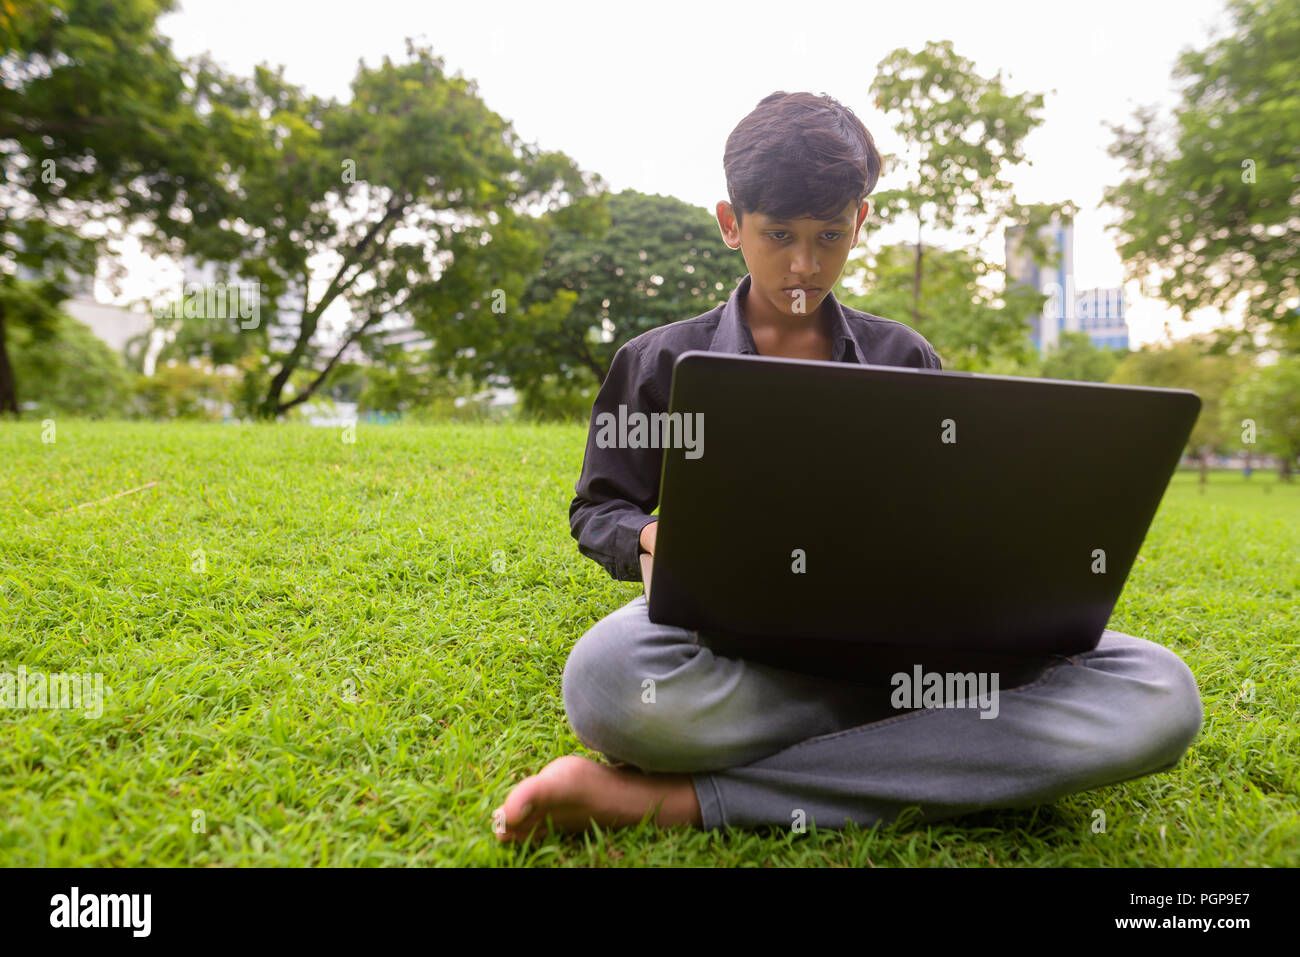 Portrait of young Indian boy relaxing at the park Stock Photo